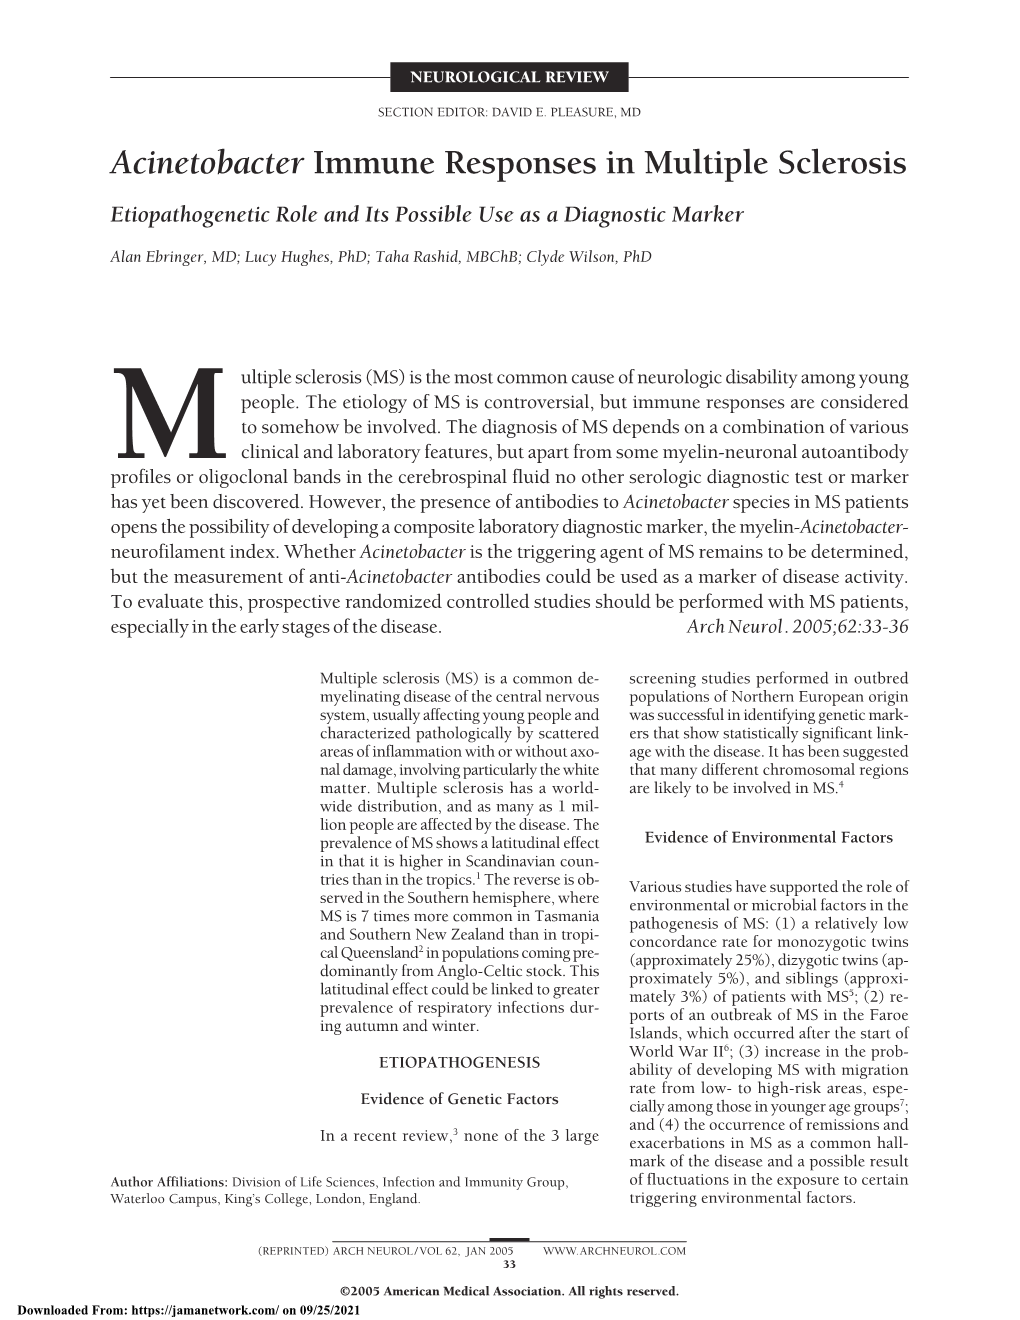 Acinetobacter Immune Responses in Multiple Sclerosis Etiopathogenetic Role and Its Possible Use As a Diagnostic Marker